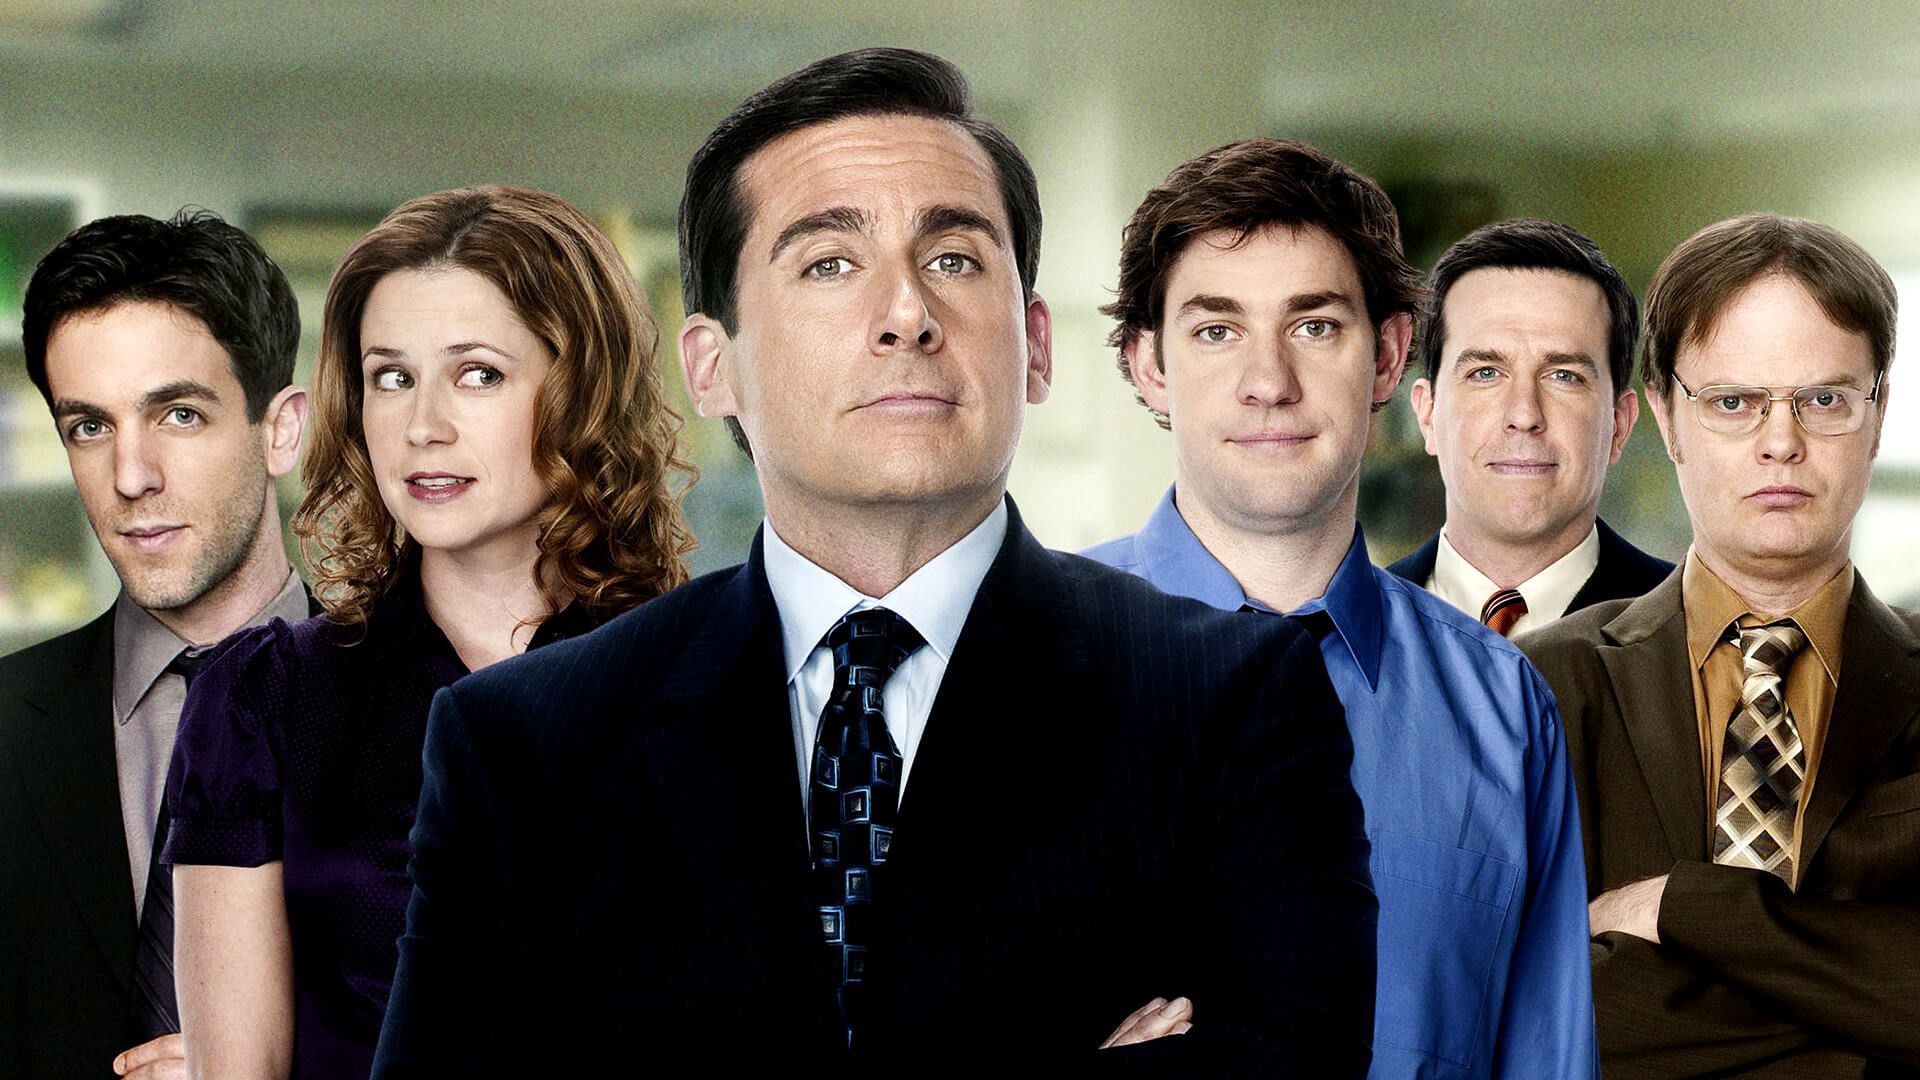 The Office Computer Wallpaper 68629 1920x1080px